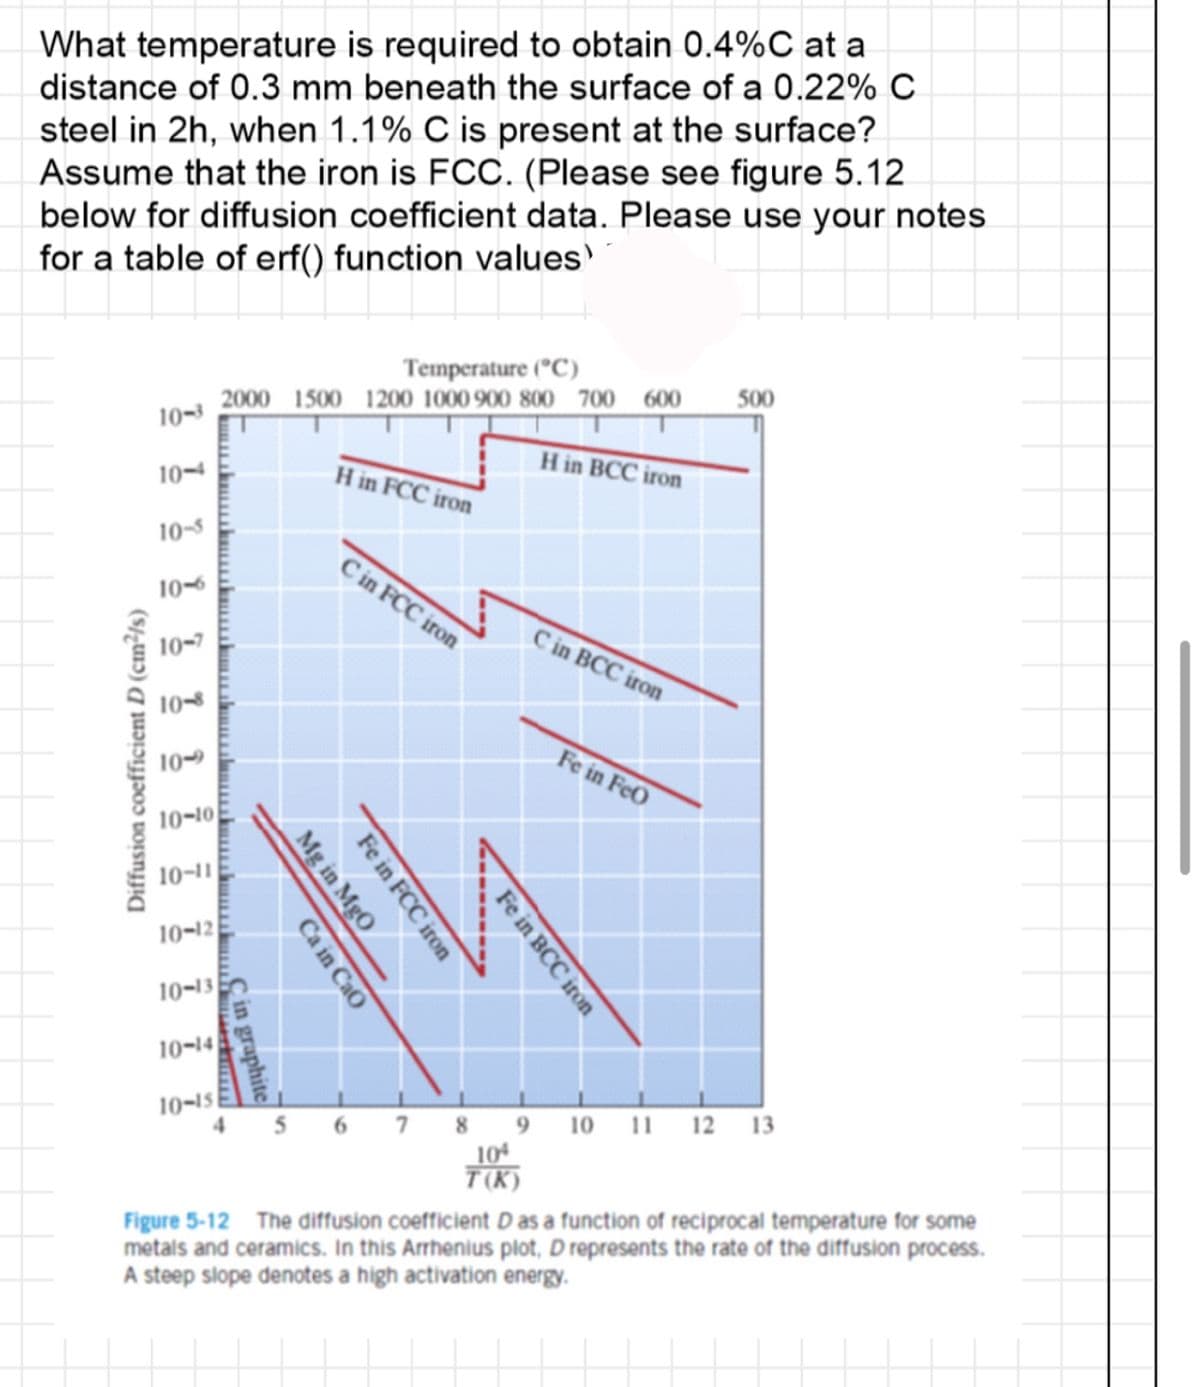 What temperature is required to obtain 0.4%C at a
distance of 0.3 mm beneath the surface of a 0.22% C
steel in 2h, when 1.1% C is present at the surface?
Assume that the iron is FCC. (Please see figure 5.12
below for diffusion coefficient data. Please use your notes
for a table of erf() function values
Diffusion coefficient D (cm²/s)
ܐ
ܐ
ܐ
ܐ
10-
10-5
10-
10-10
10-11
10-12
10-13
10-14
10-15
Temperature (°C)
2000 1500 1200 1000 900 800 700 600
Cin graphite
Mg in MgO
Ca in Cao
Hin FCC iron
C in FCC iron
Fe in FCC iron
Fe in BCC iron
H in BCC iron
C in BCC iron
Fe in FeO
500
5 6 7 8 9 10 11 12 13
104
T(K)
Figure 5-12 The diffusion coefficient D as a function of reciprocal temperature for some
metals and ceramics. In this Arrhenius plot, D represents the rate of the diffusion process.
A steep slope denotes a high activation energy.